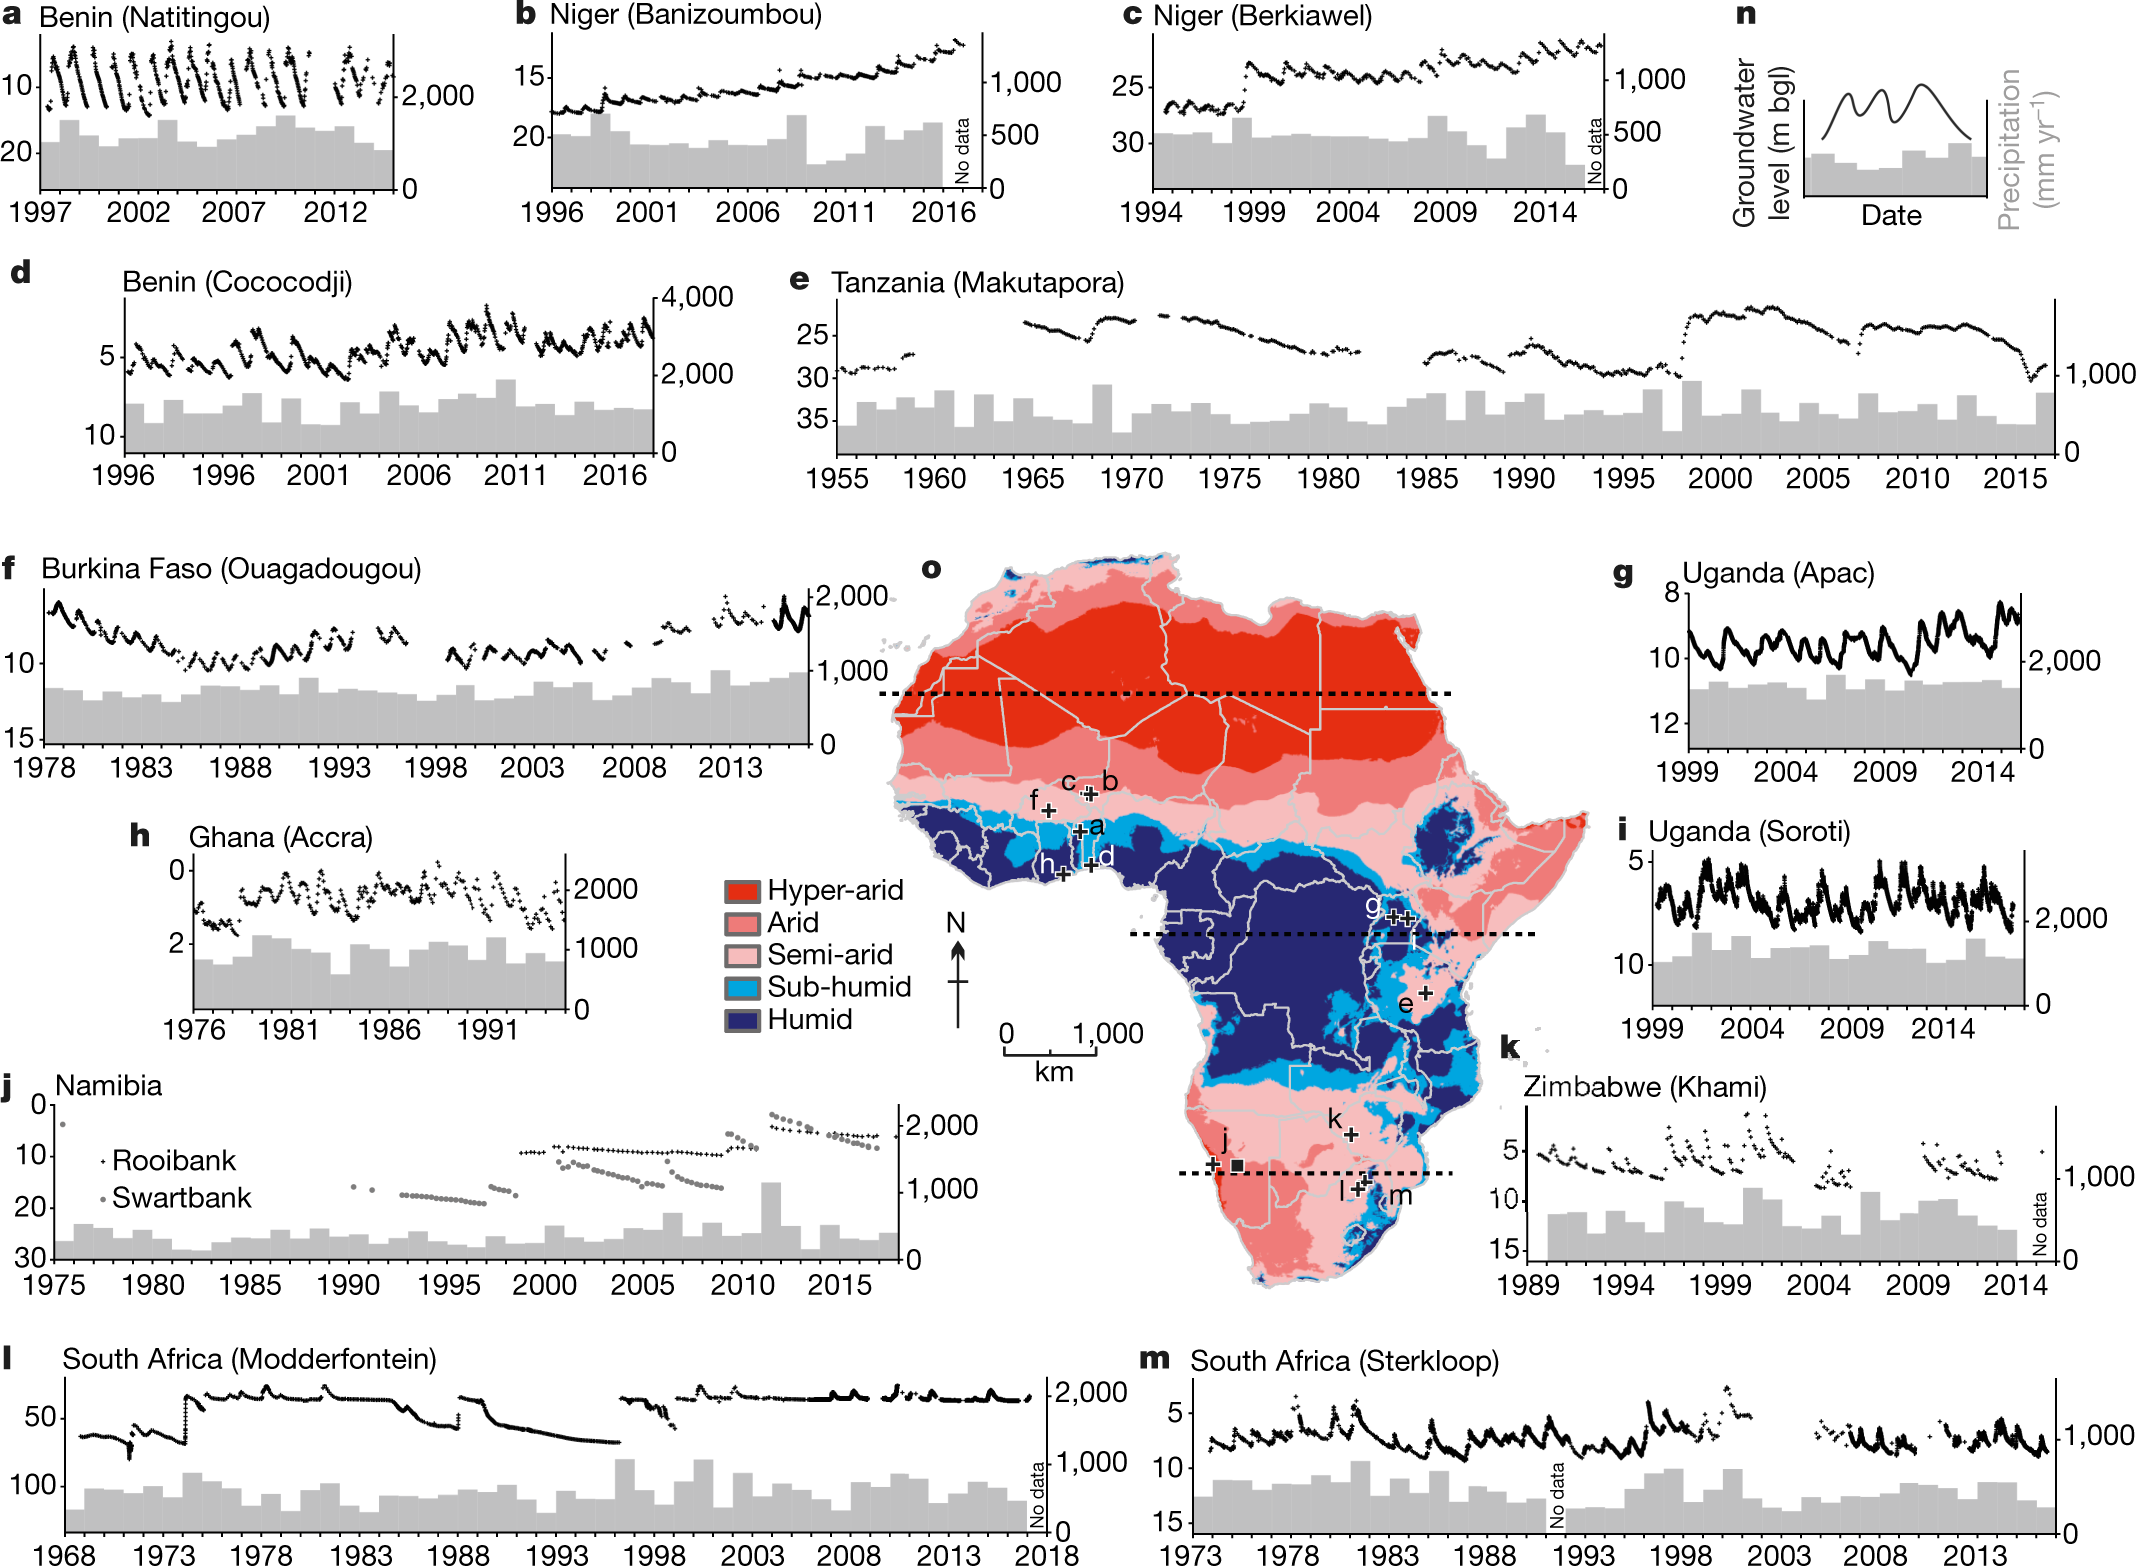 Observed controls on resilience of groundwater to climate variability in  sub-Saharan Africa | Nature